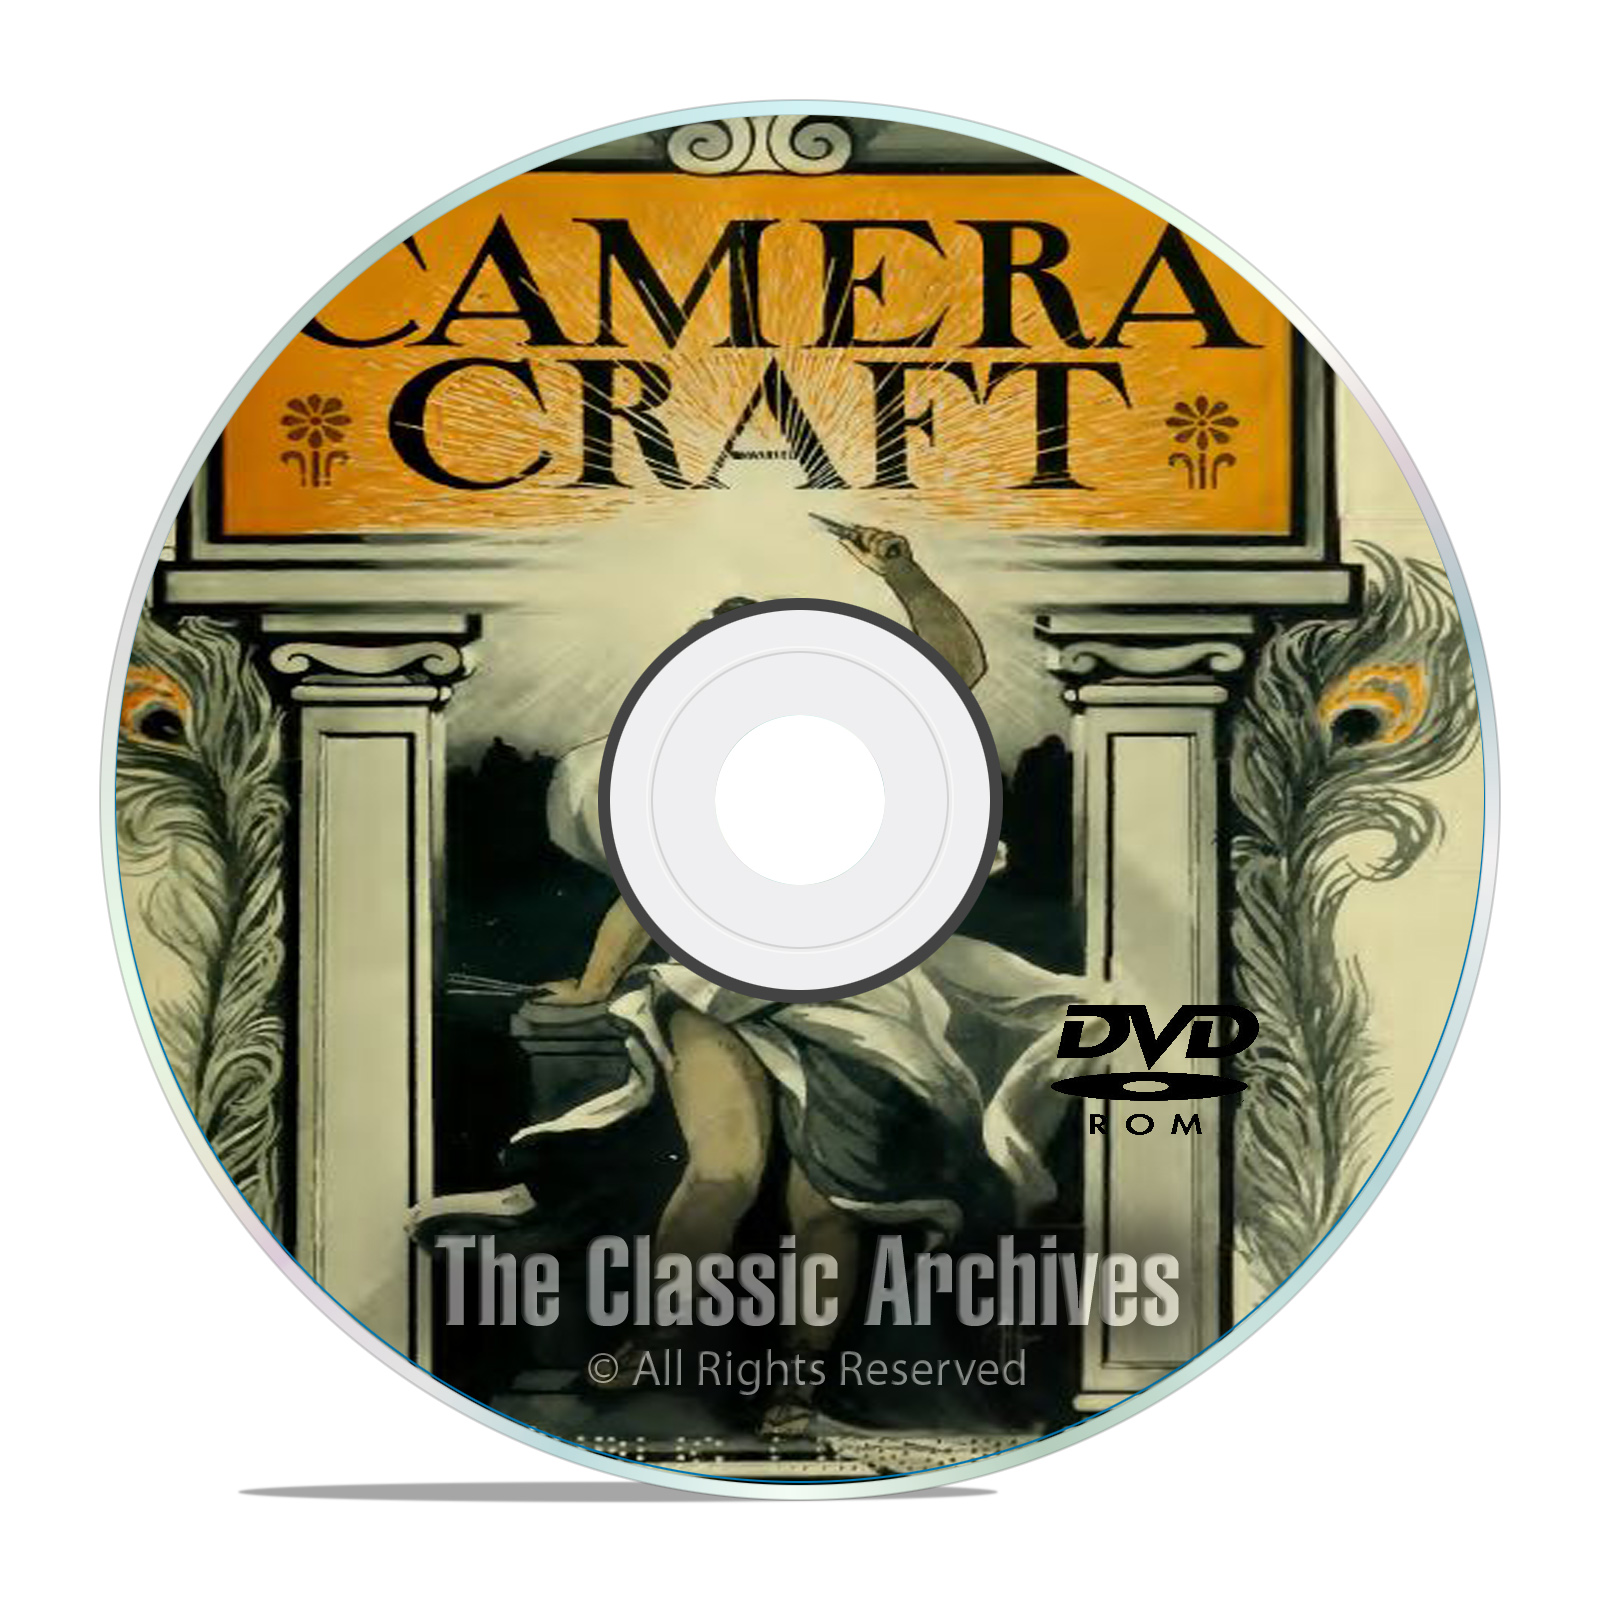 Camera Craft Magazine, 490 back issues, World Photography History, PDF DVD - Click Image to Close